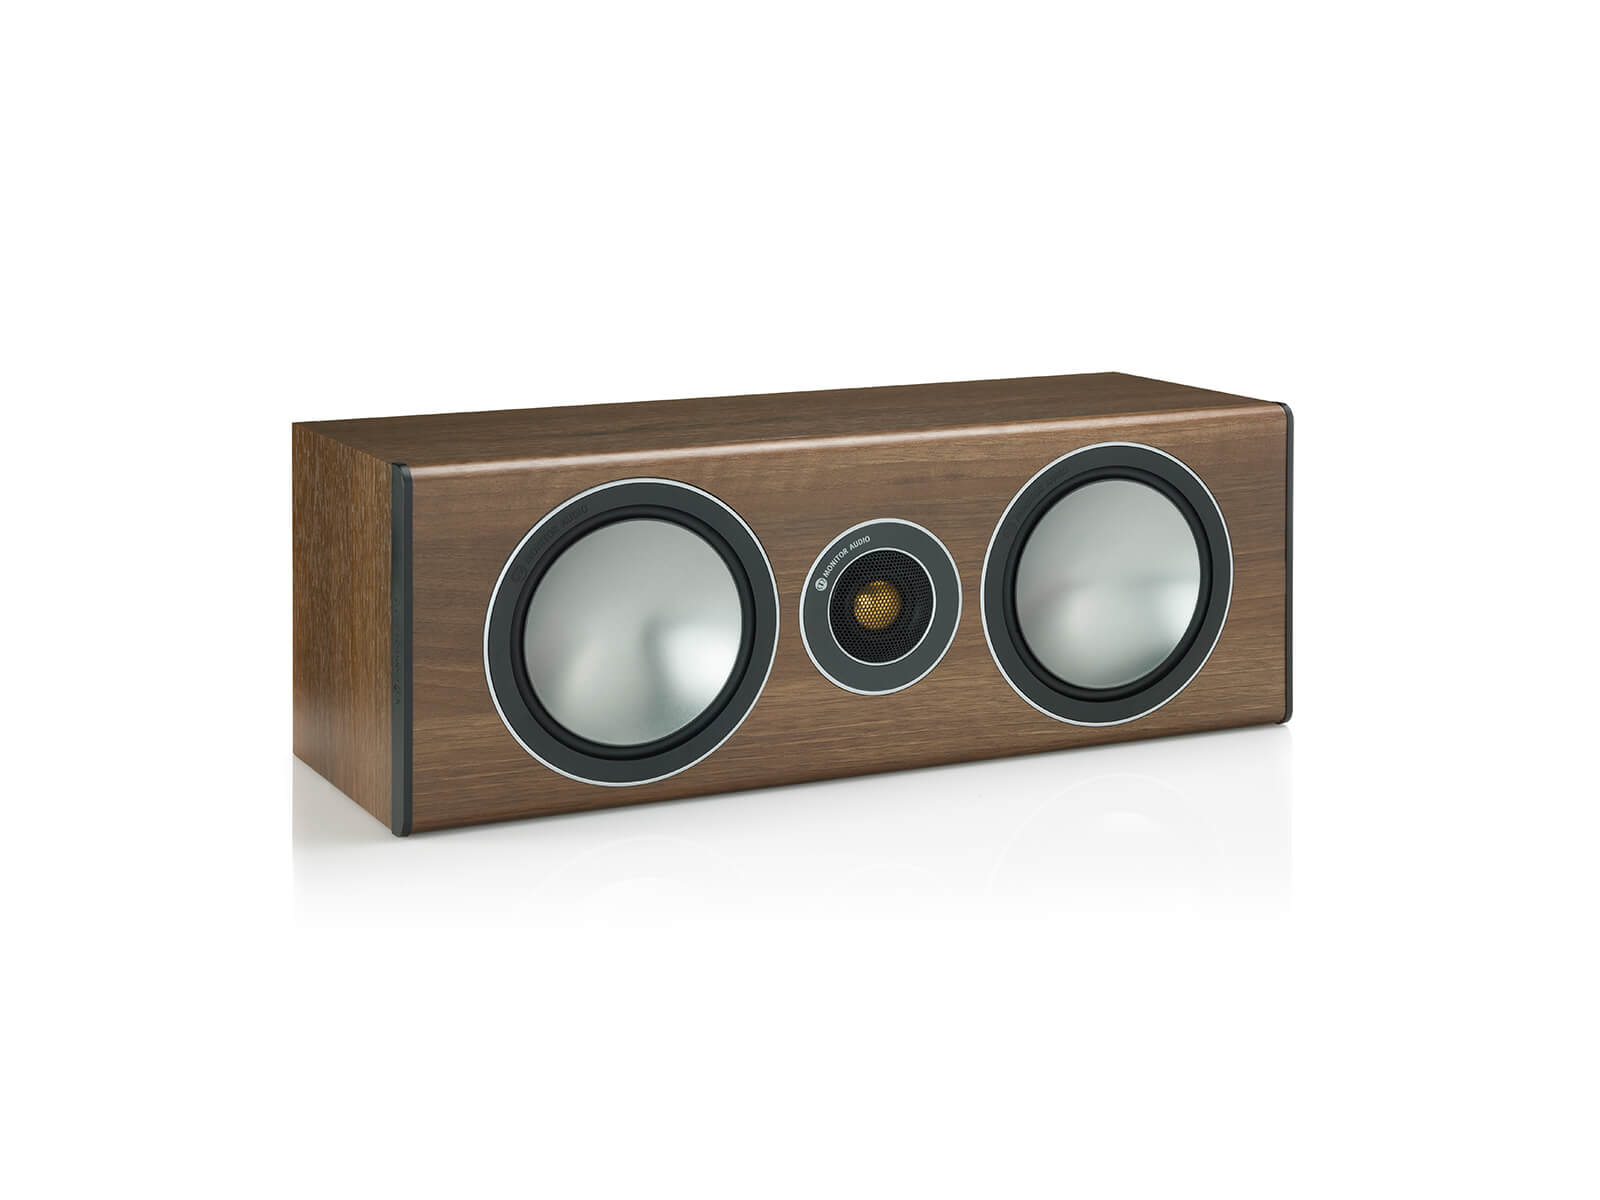 Bronze Centre, grille-less centre channel speakers, with a walnut vinyl finish.